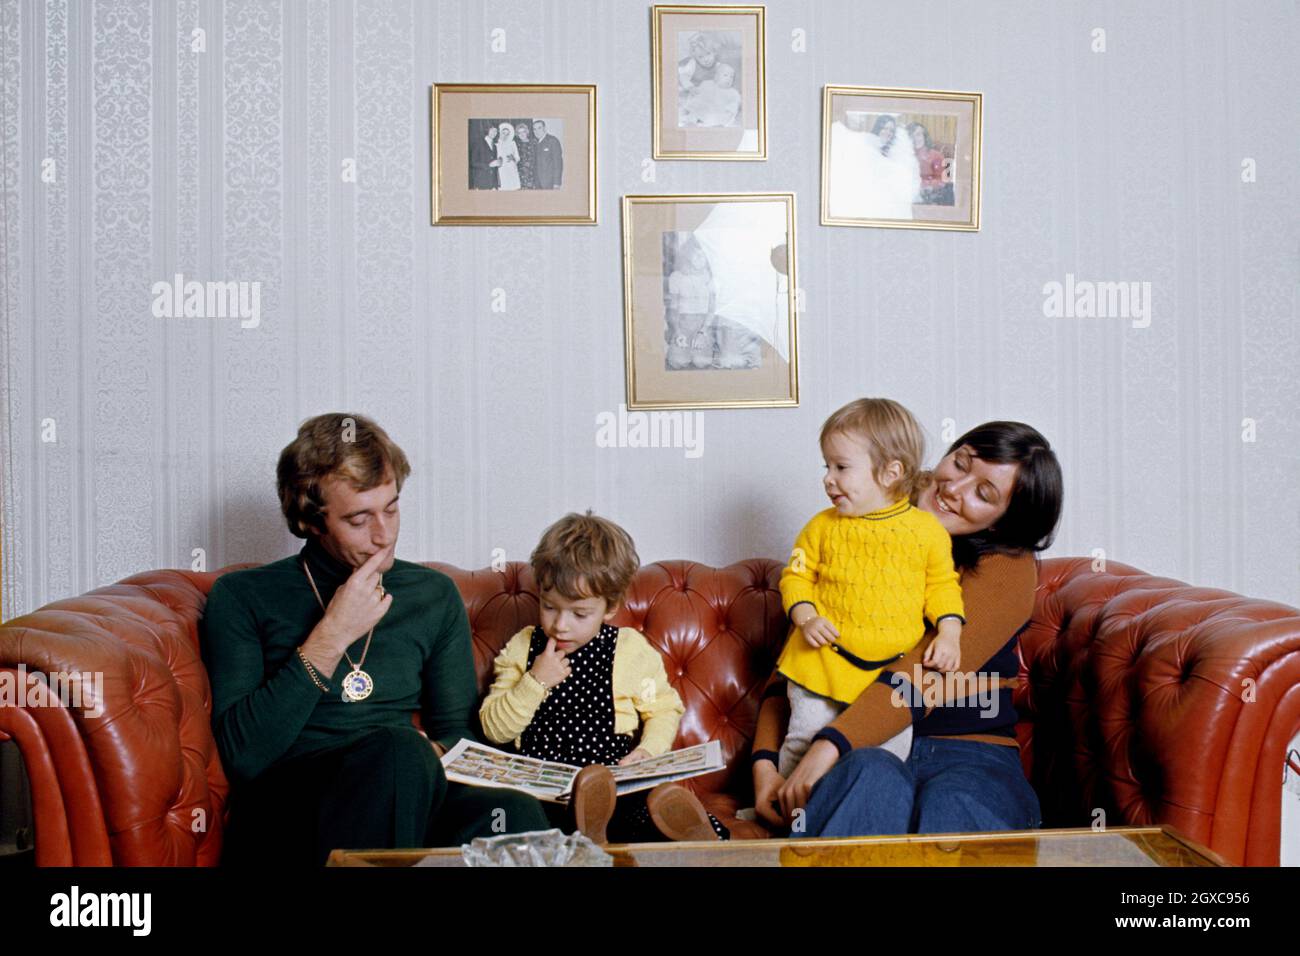 Bee Gees Singer Robin Gibb with his wife Molly Hullis (r) and two children Spencer and Melissa in his home, circa 1974 Stock Photo